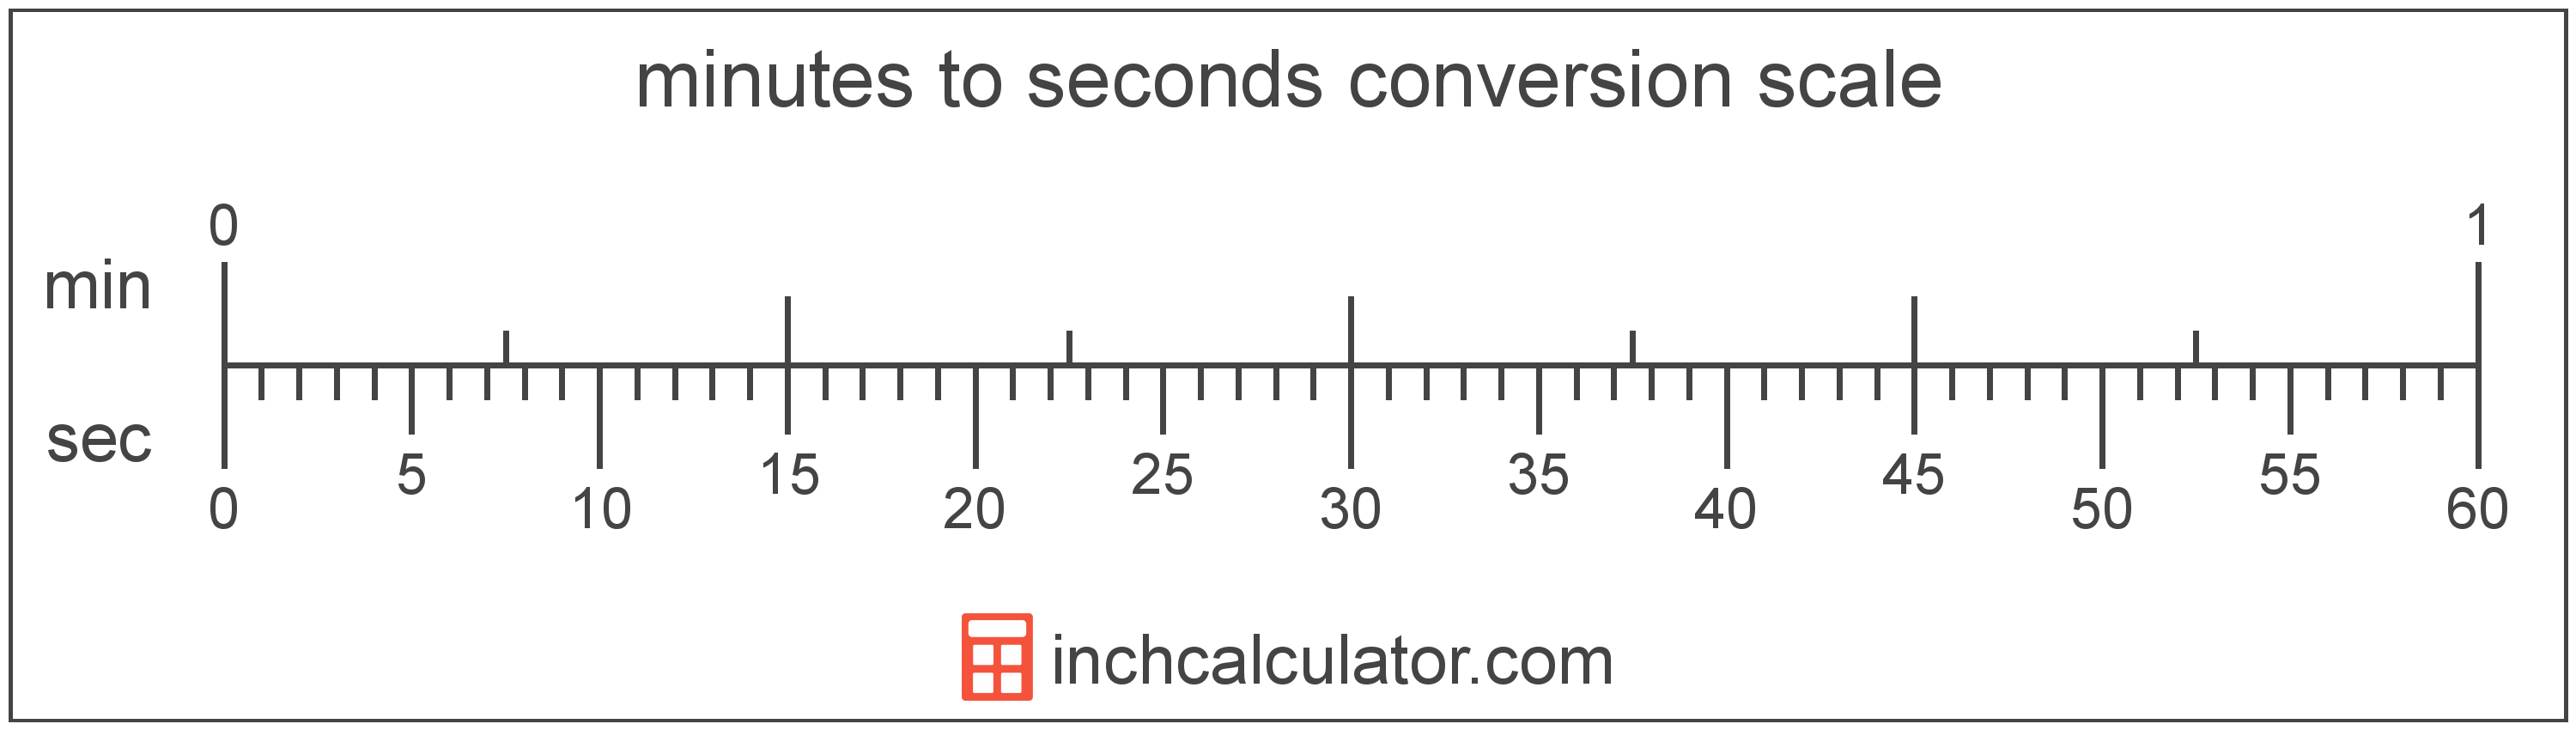 conversion scale showing minutes and equivalent seconds time values